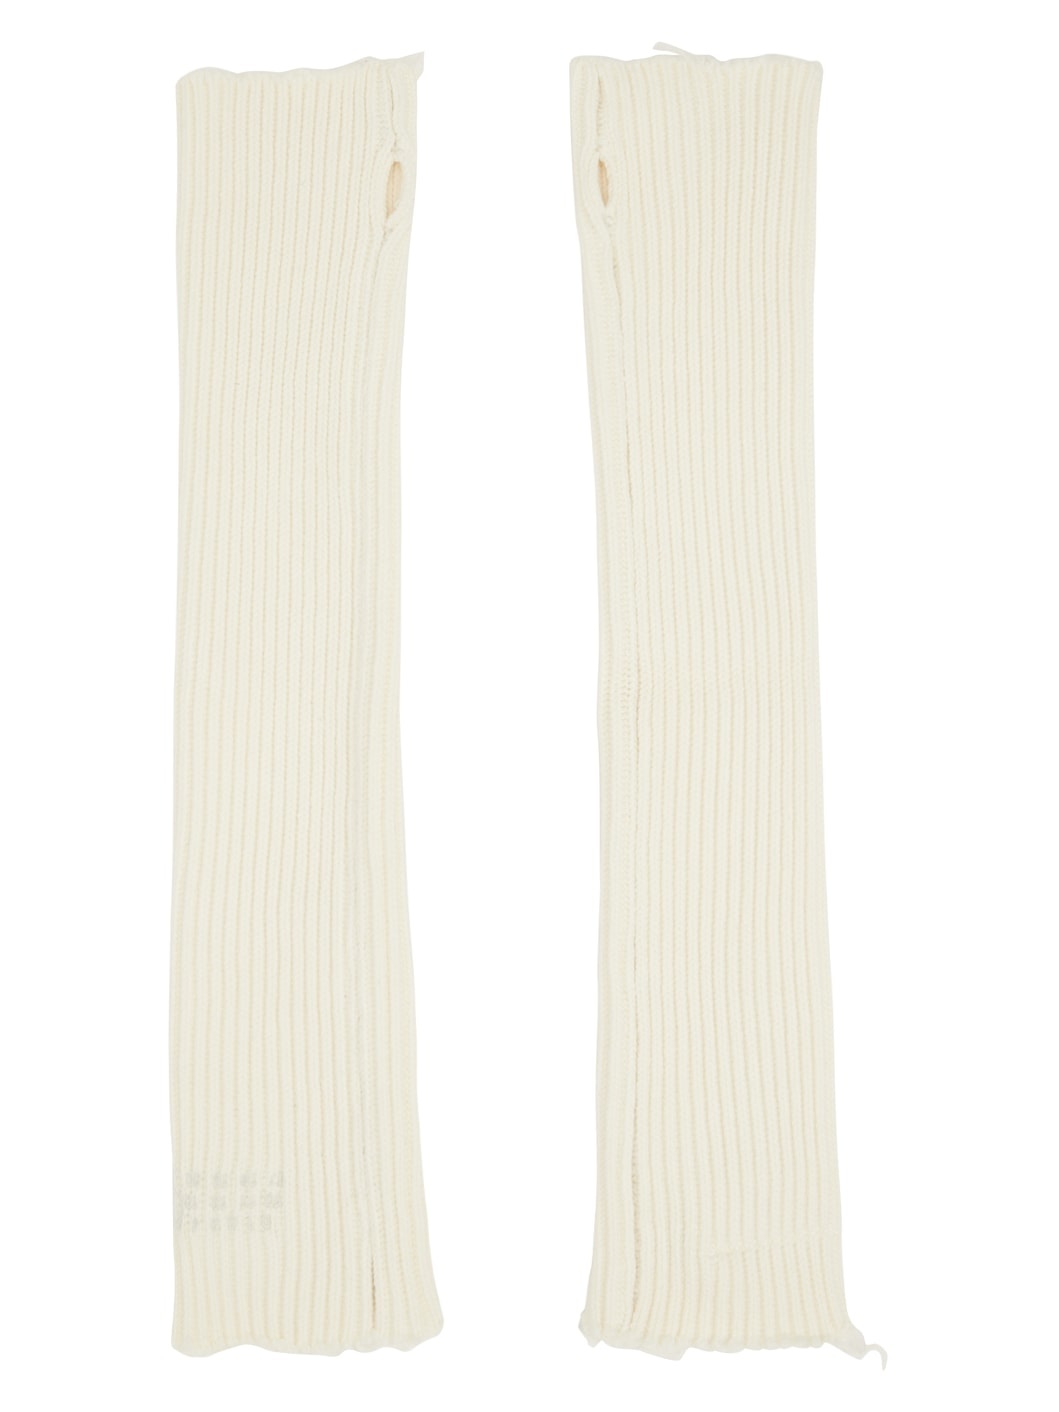 Off-White Ribbed Arm Warmers - 2